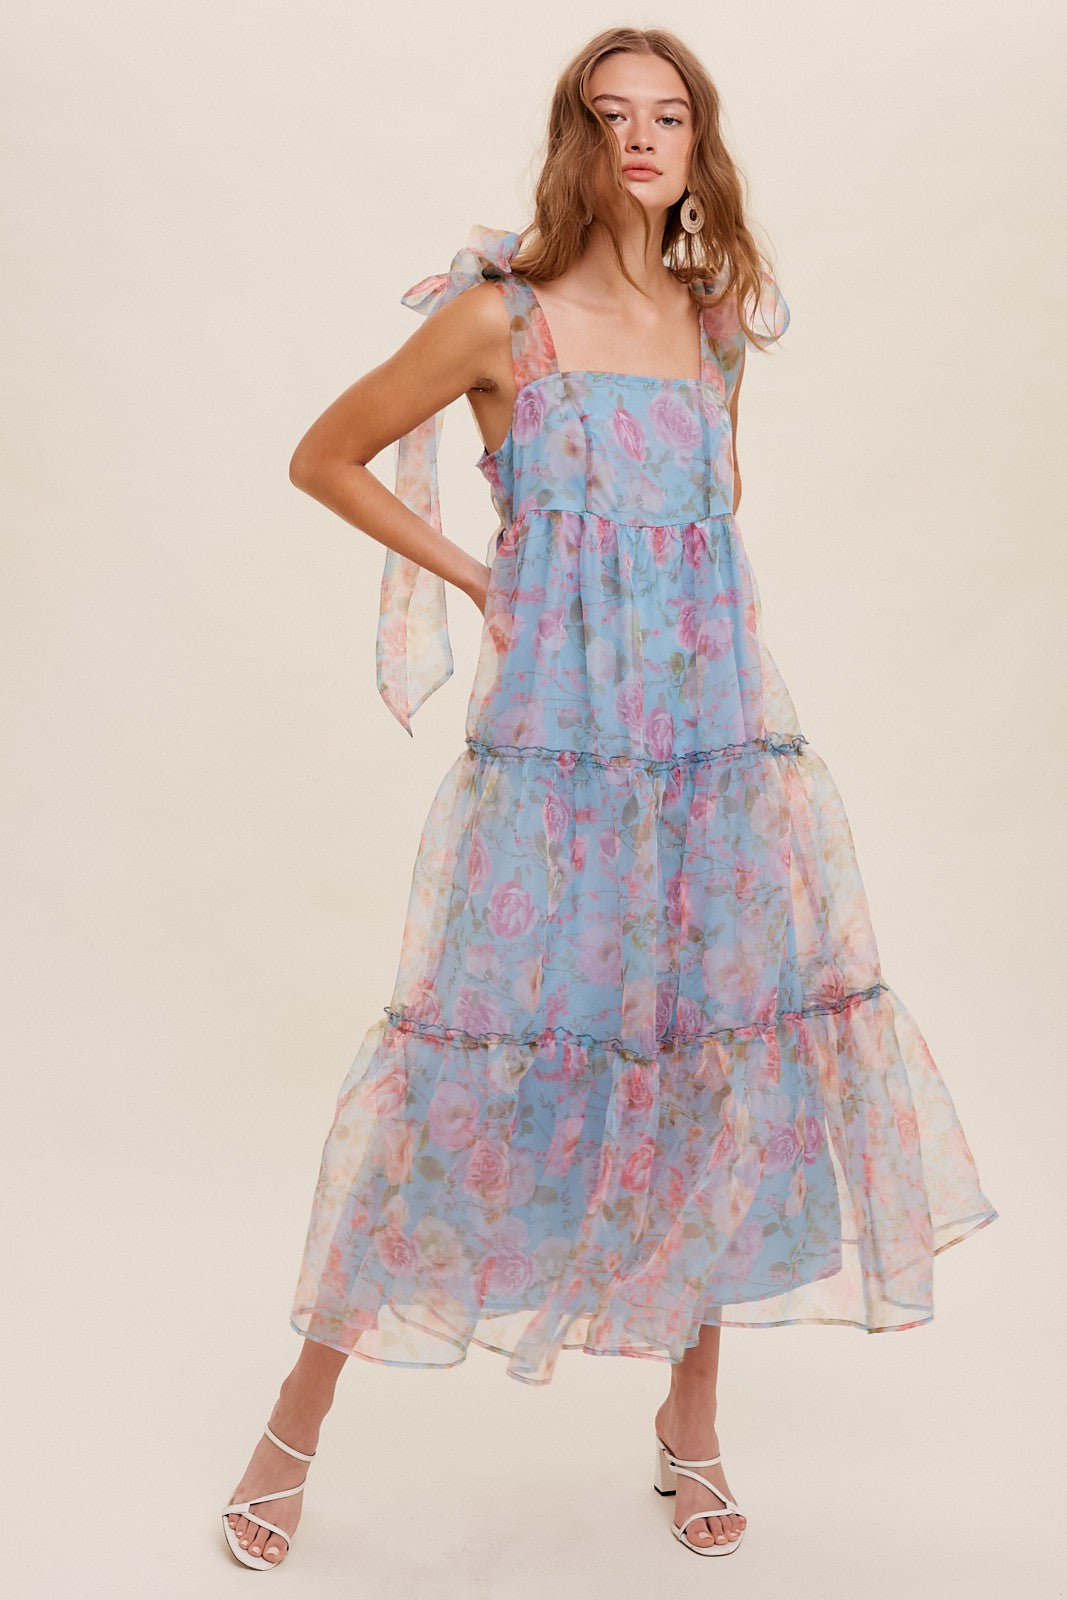 Fuchsia Floral Chiffon Front Sweetheart Neck Lace-Up Back Tiered